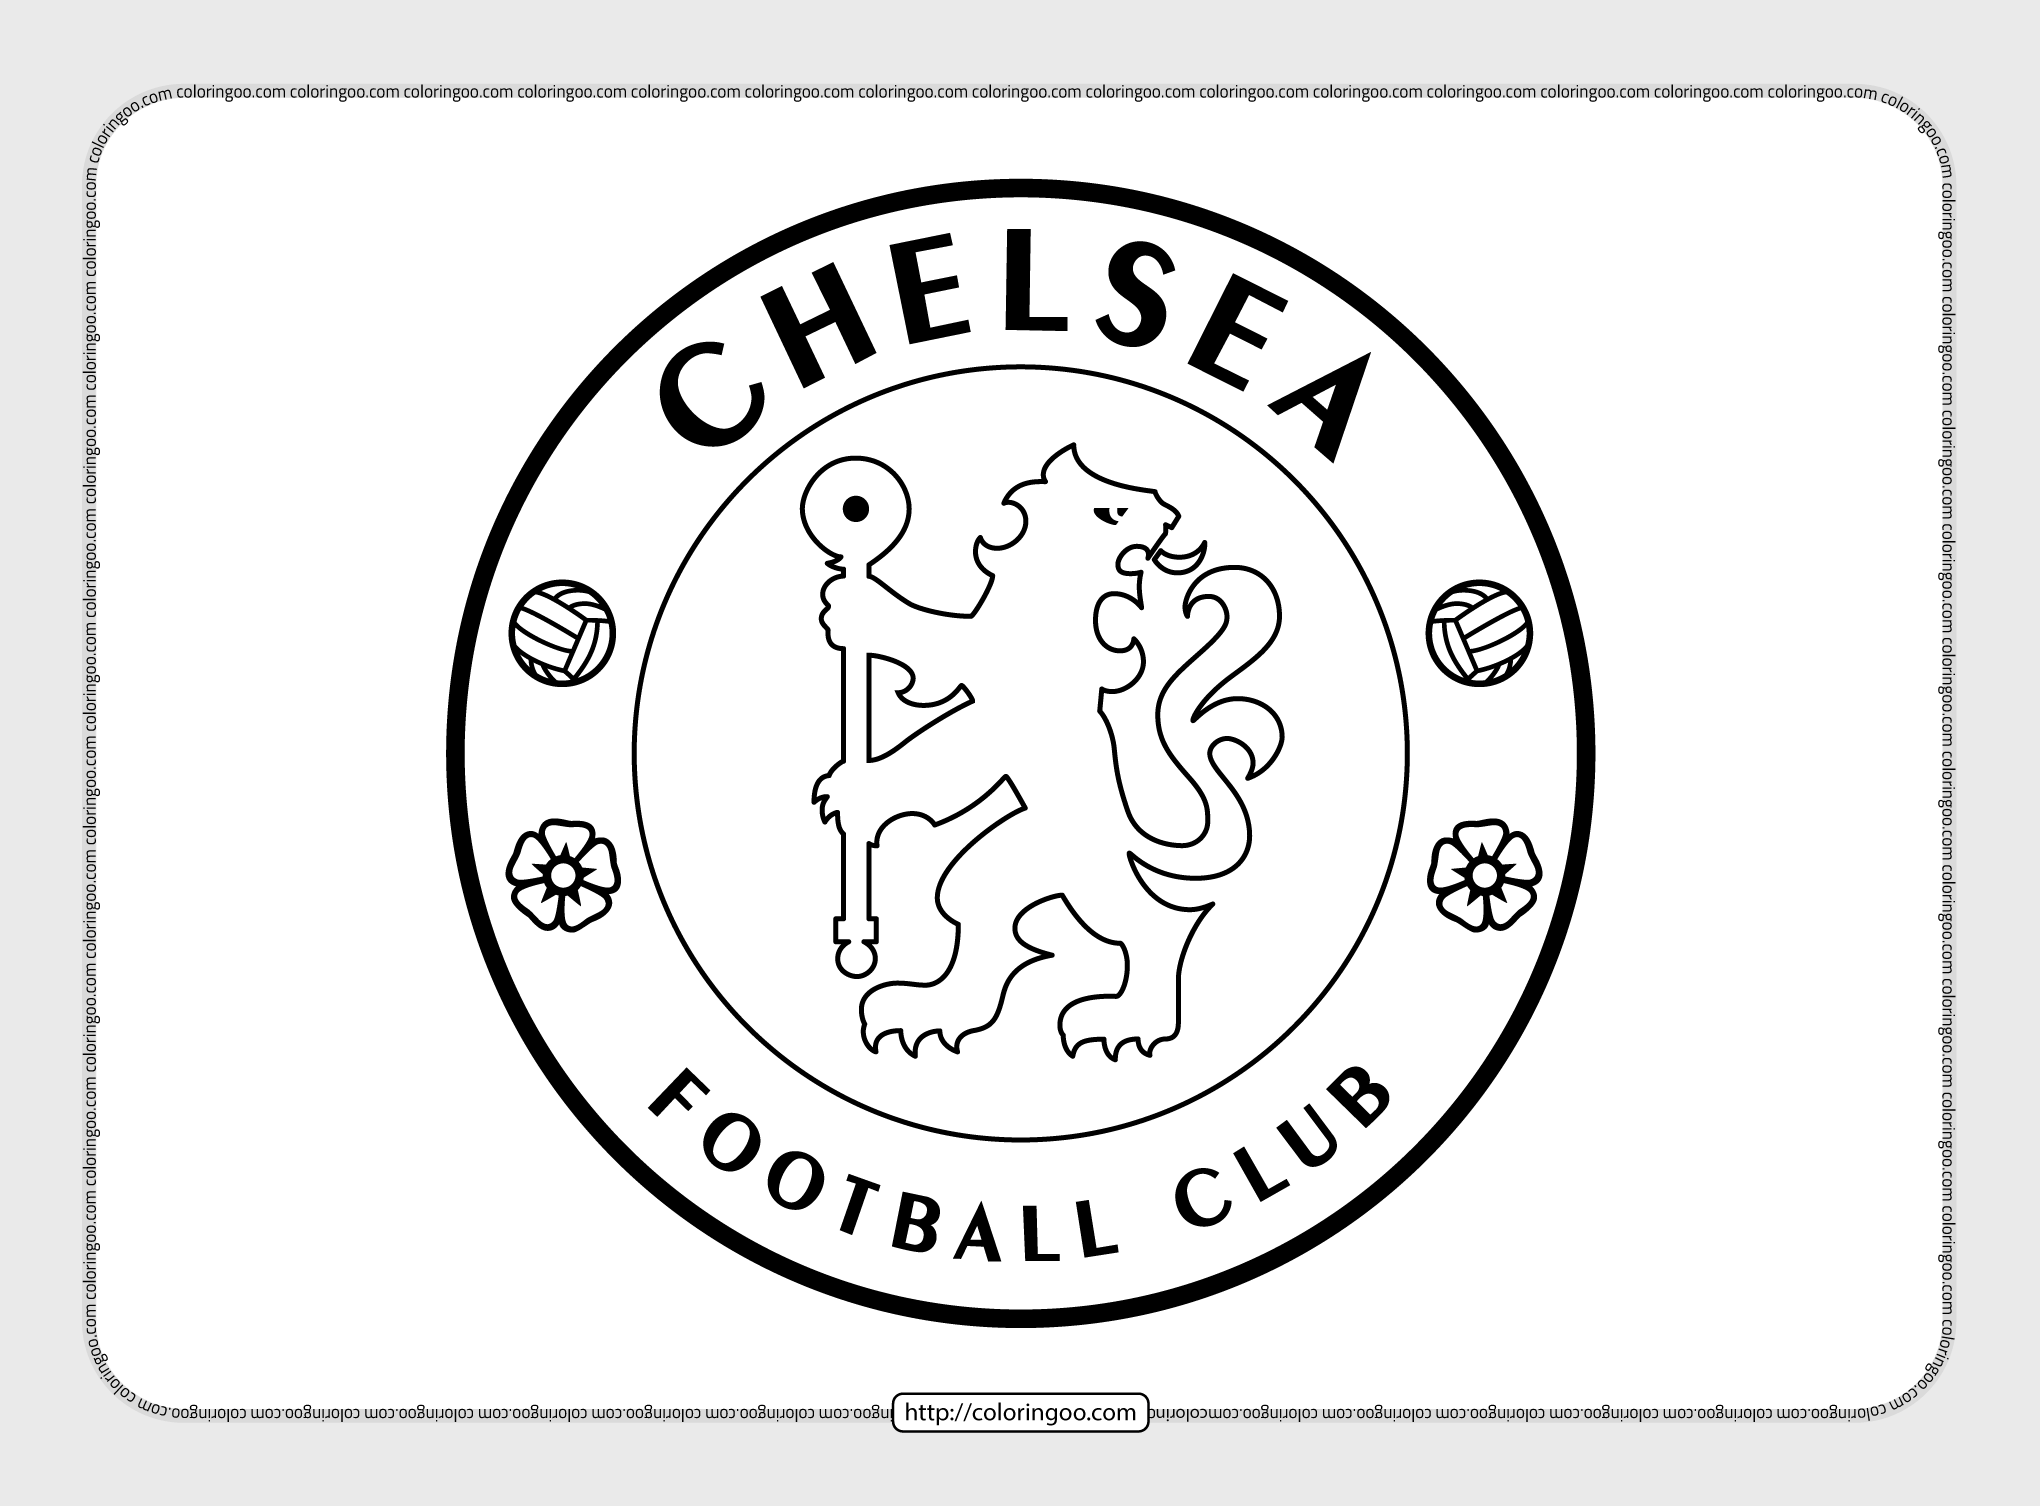 Chelsea Football Club Logo Coloring Page